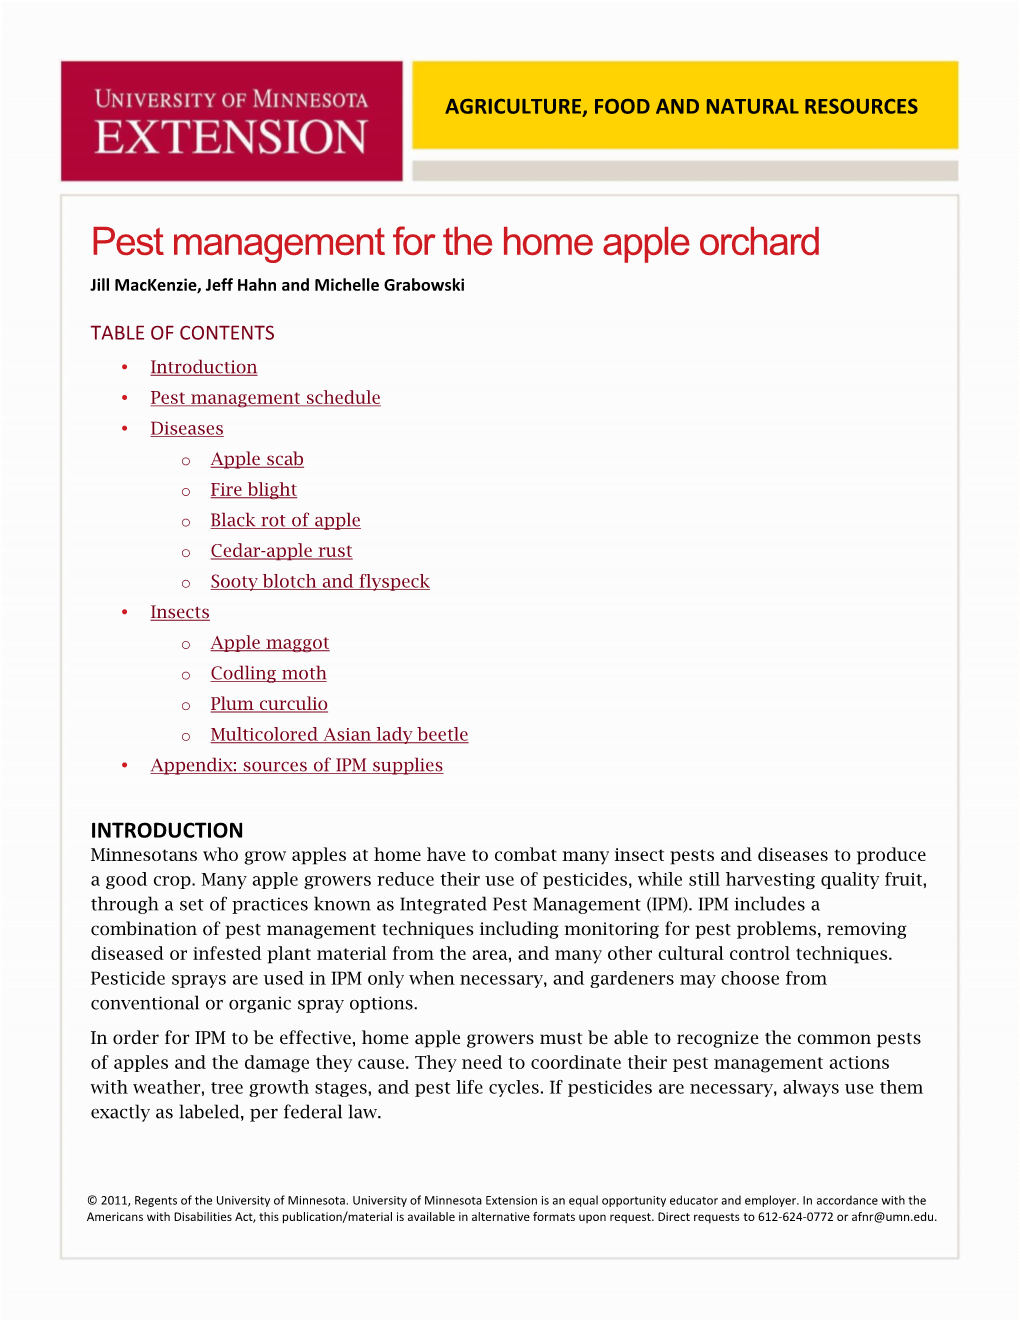 Pest Management for the Home Apple Orchard Jill Mackenzie, Jeff Hahn and Michelle Grabowski